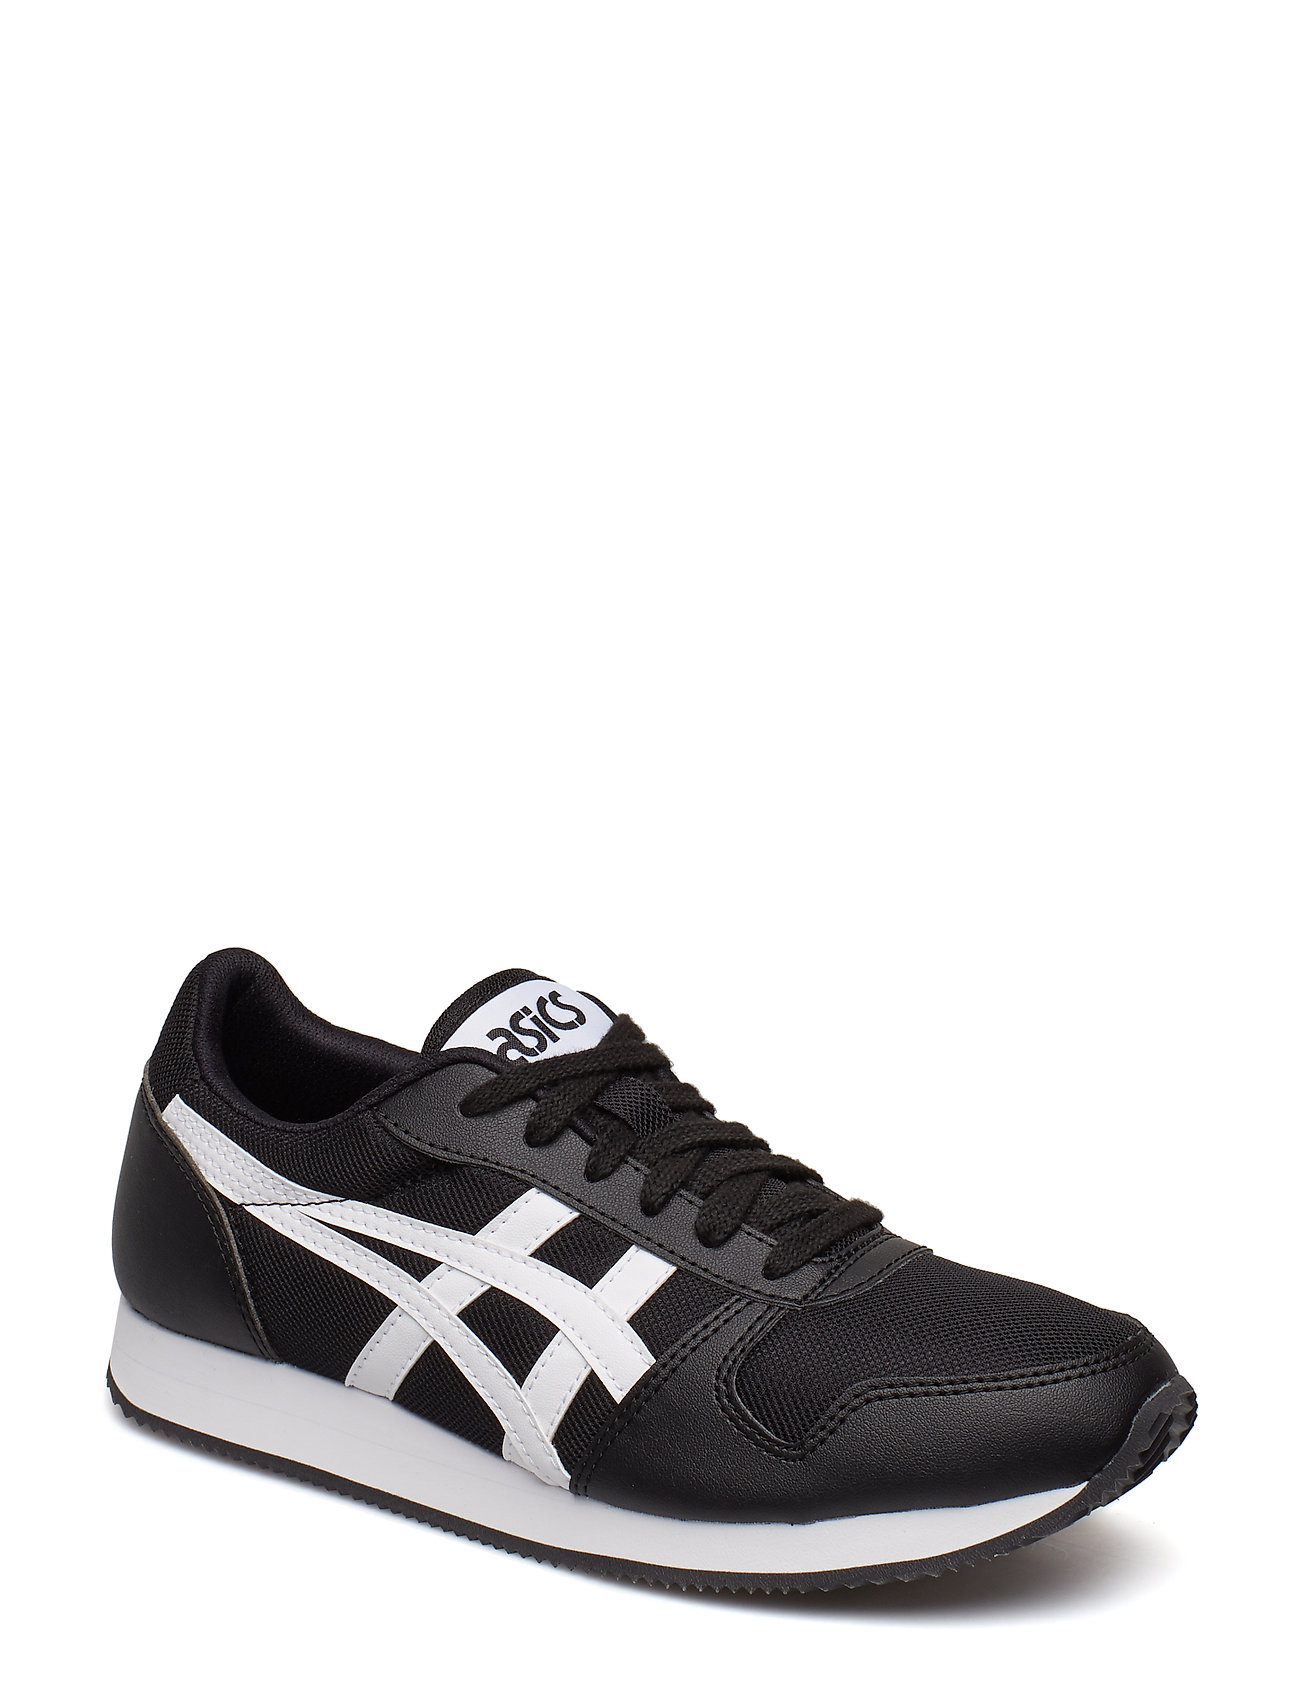 curreo ii asics tiger cheap online